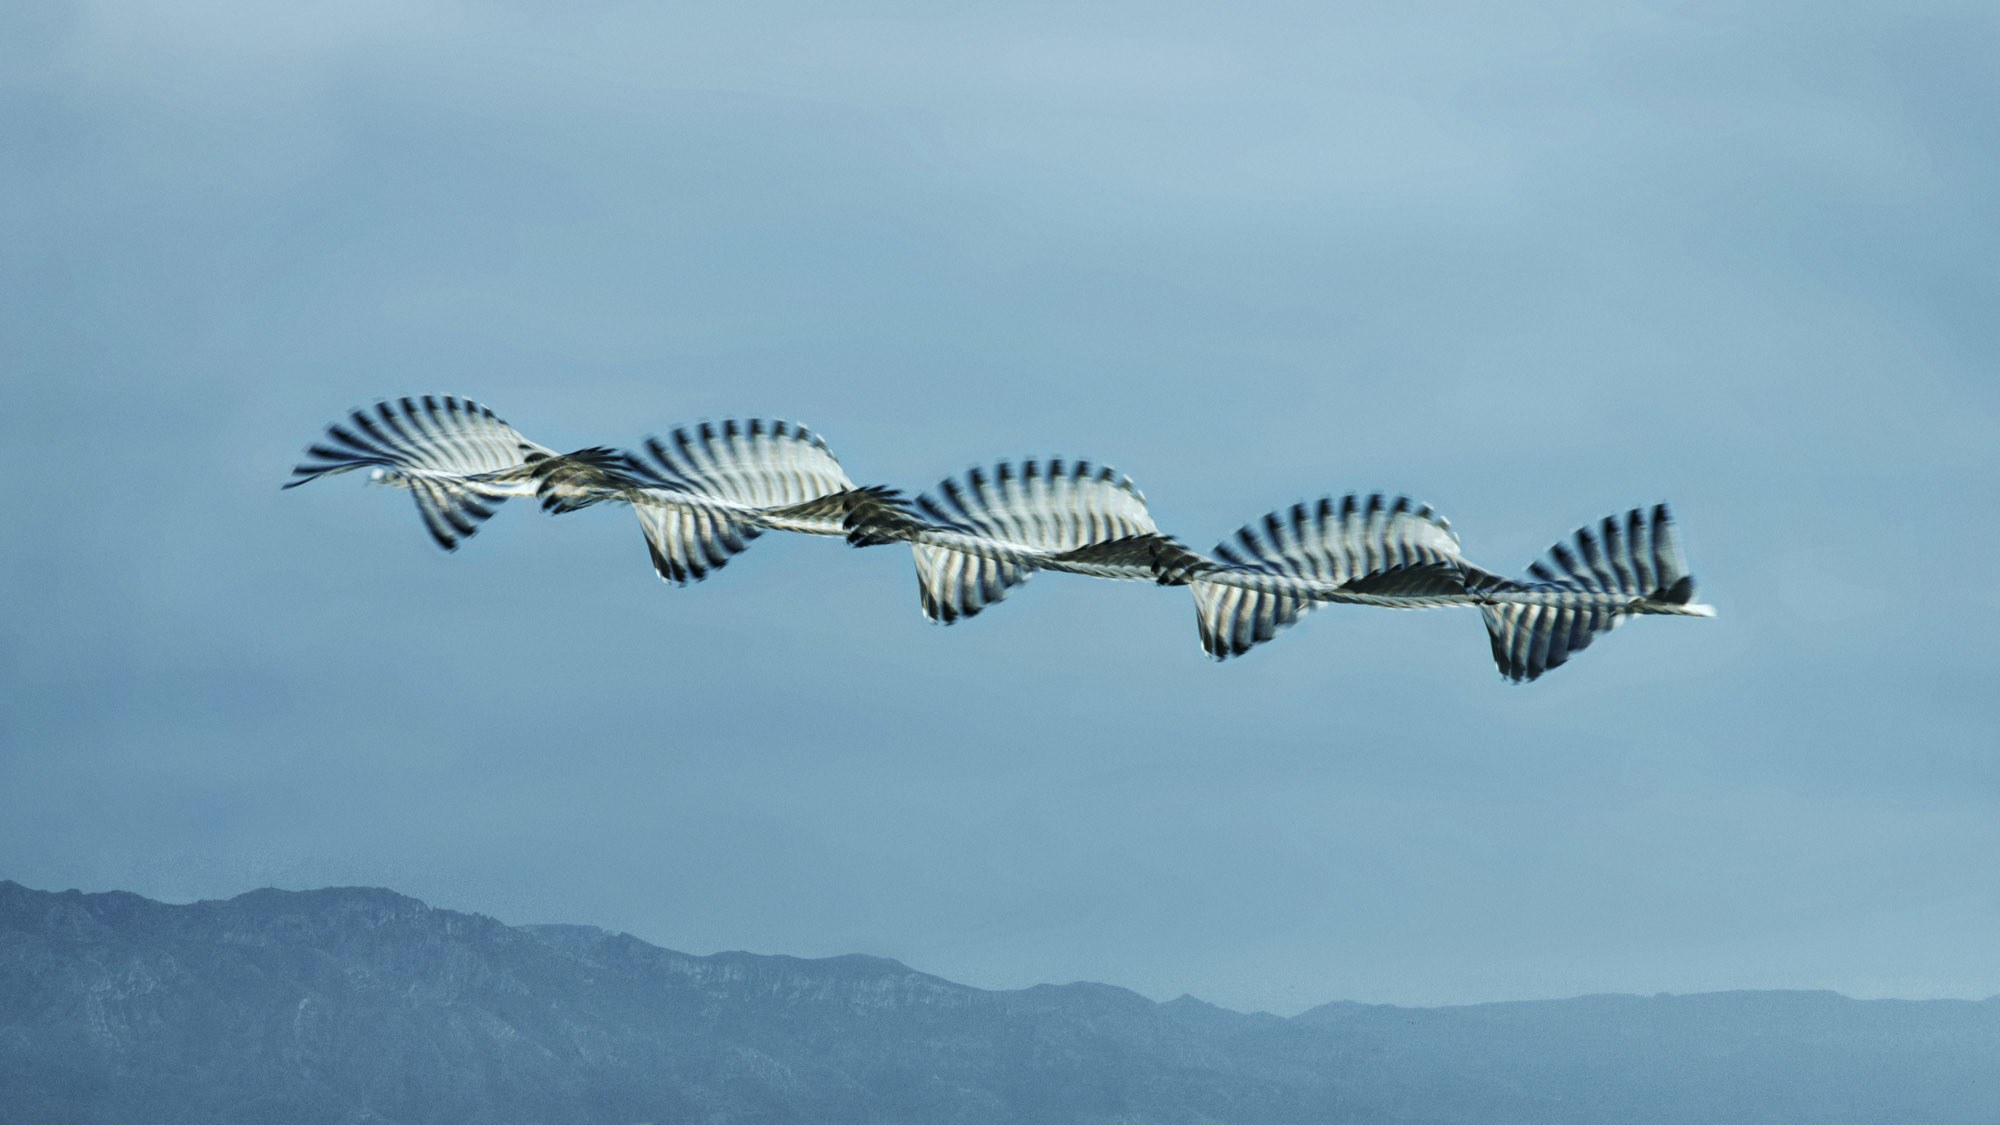 Mesmerizing Photos Capture the Flight Patterns of Birds | WIRED